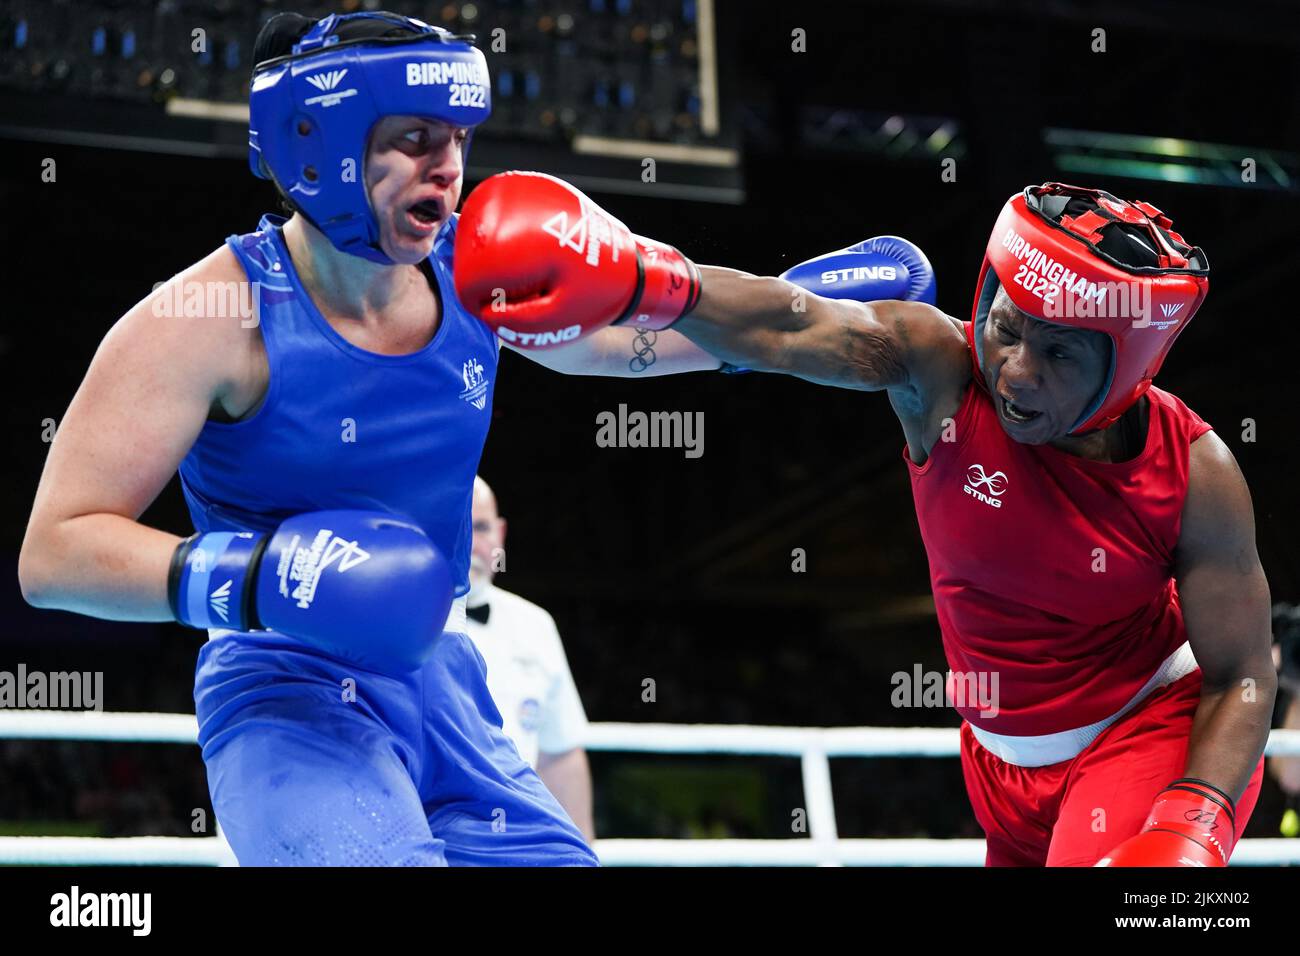 Kenya's Elizabeth Adhiambo Andiego (right) and Australia's Caitlin Anne Parker in action during the Women’s Over 70kg-75kg (Middleweight) - Quarter-Final 3 at The NEC on day six of the 2022 Commonwealth Games in Birmingham. Picture date: Wednesday August 3, 2022. Stock Photo